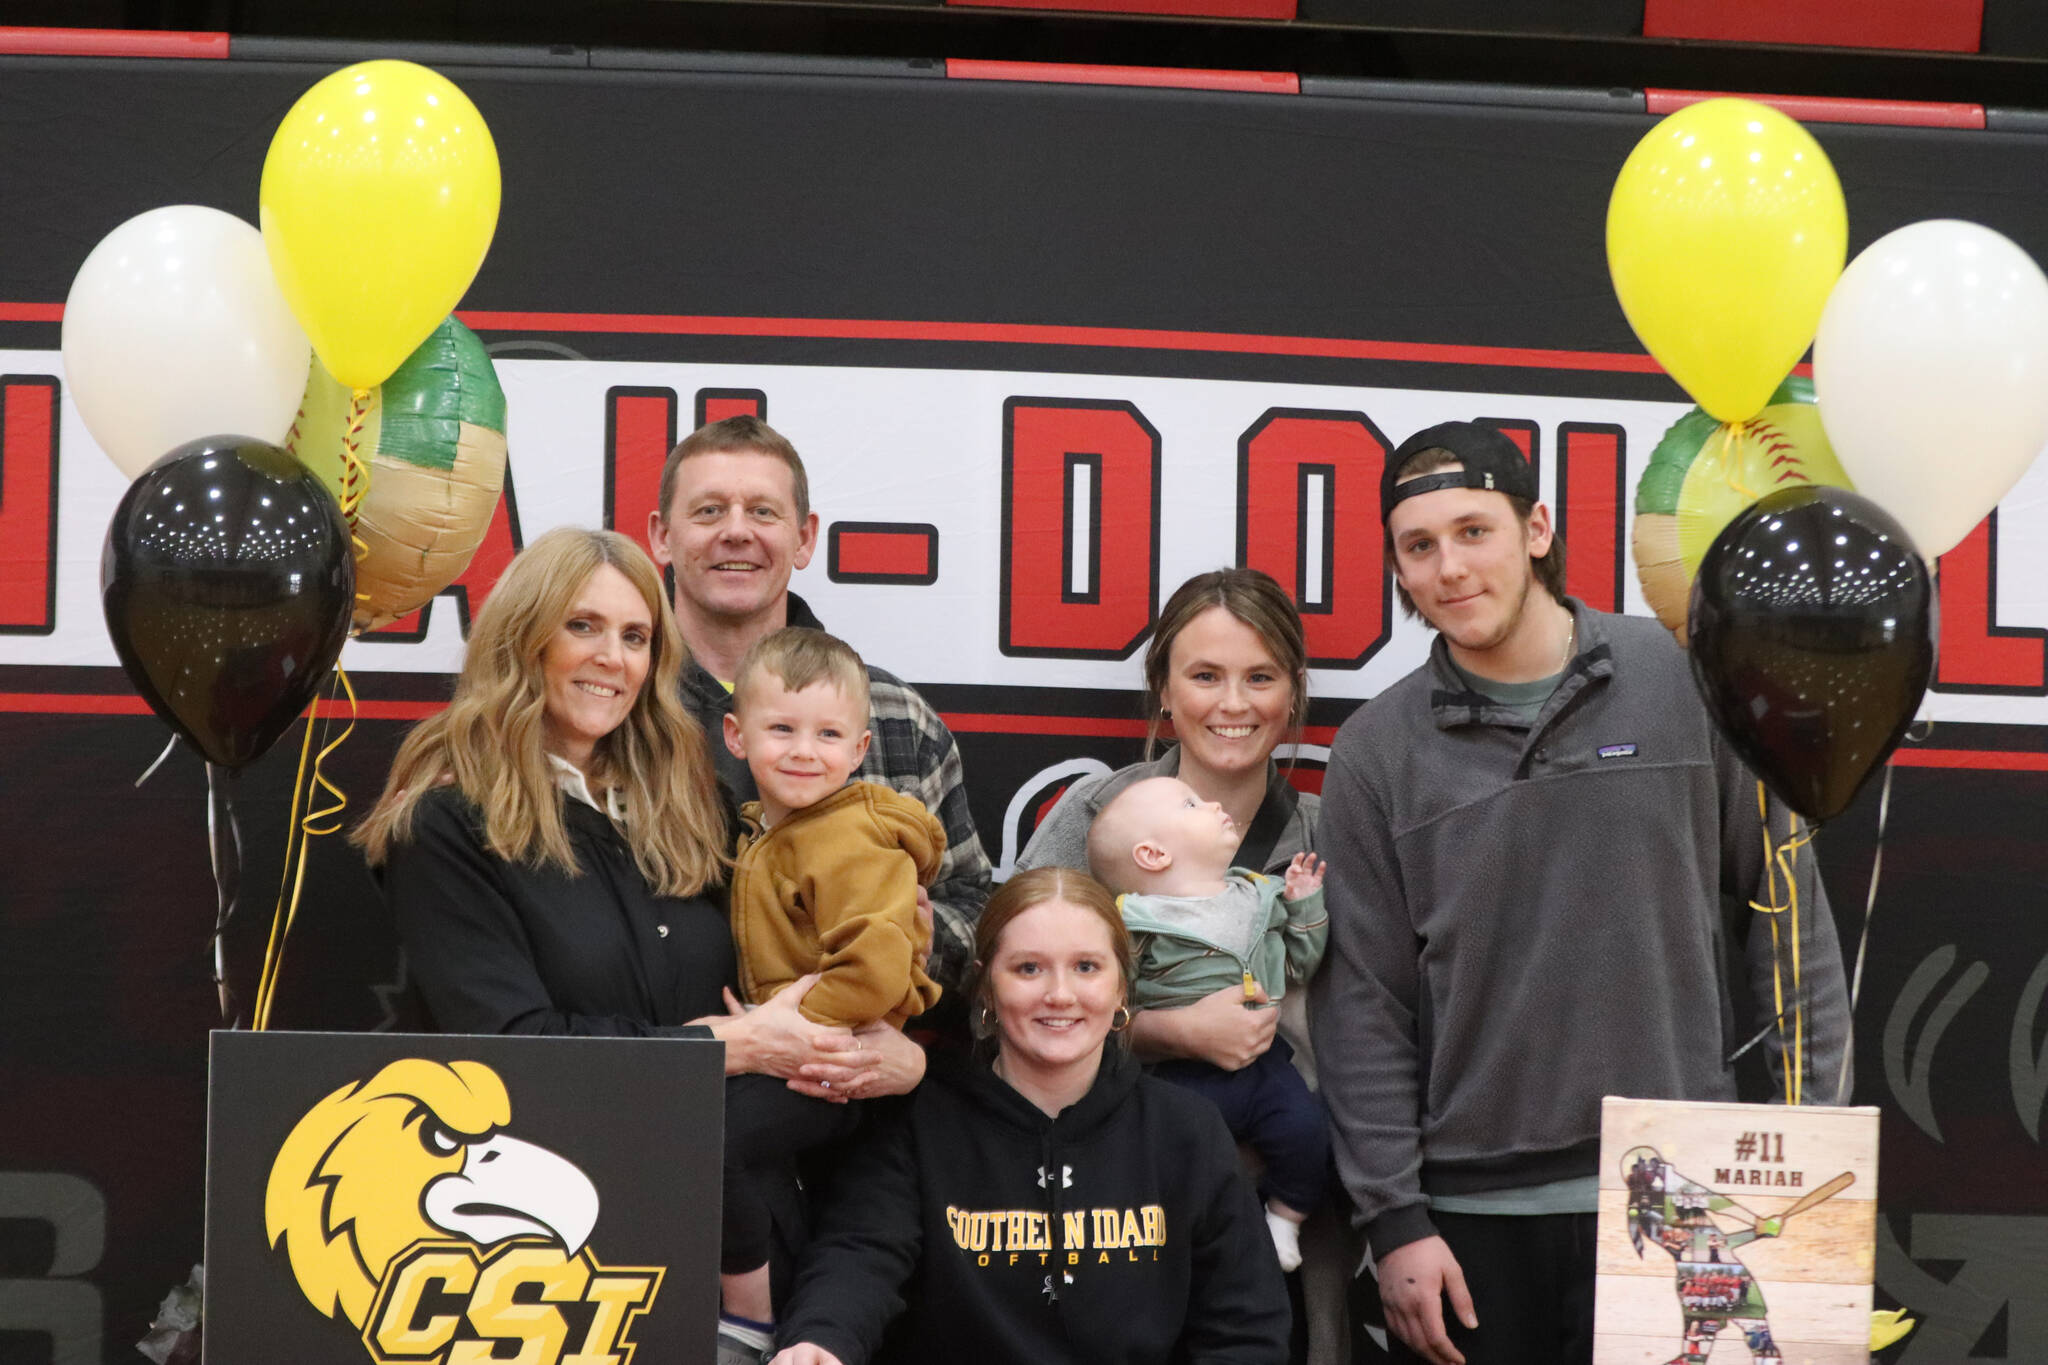 JDHS senior Mariah Schauwecker poses with her family for a photo on Wednesday after signing her letter of intent to play softball with Southern Idaho starting at the end of this summer. (Jonson Kuhn / Juneau Empire)